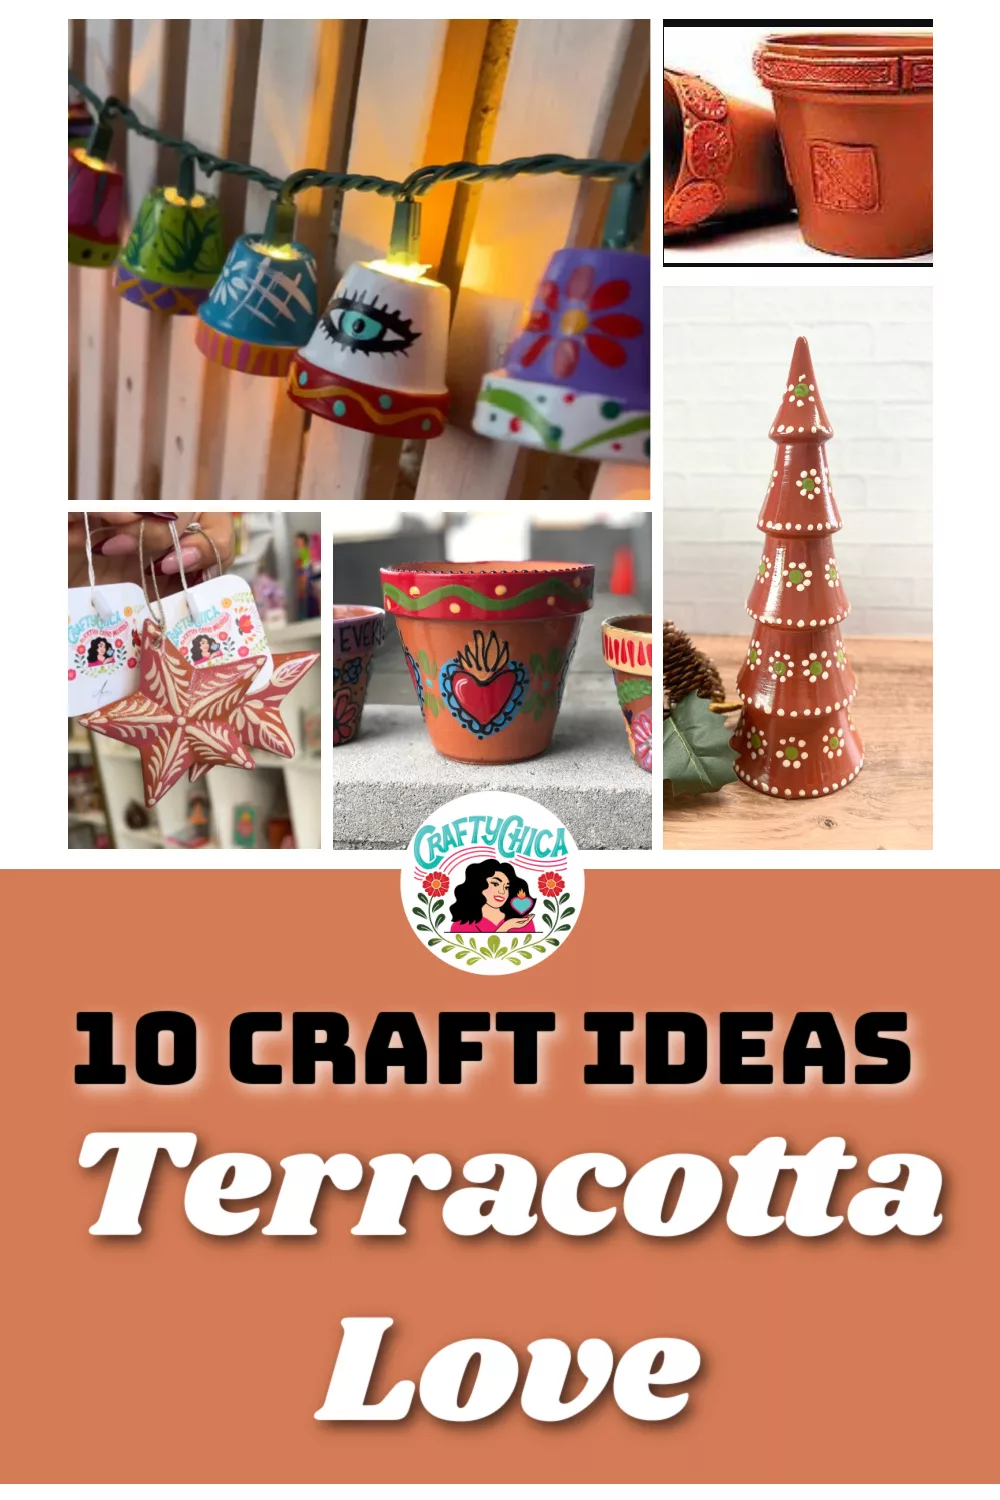 10 ideas for terracotta crafts